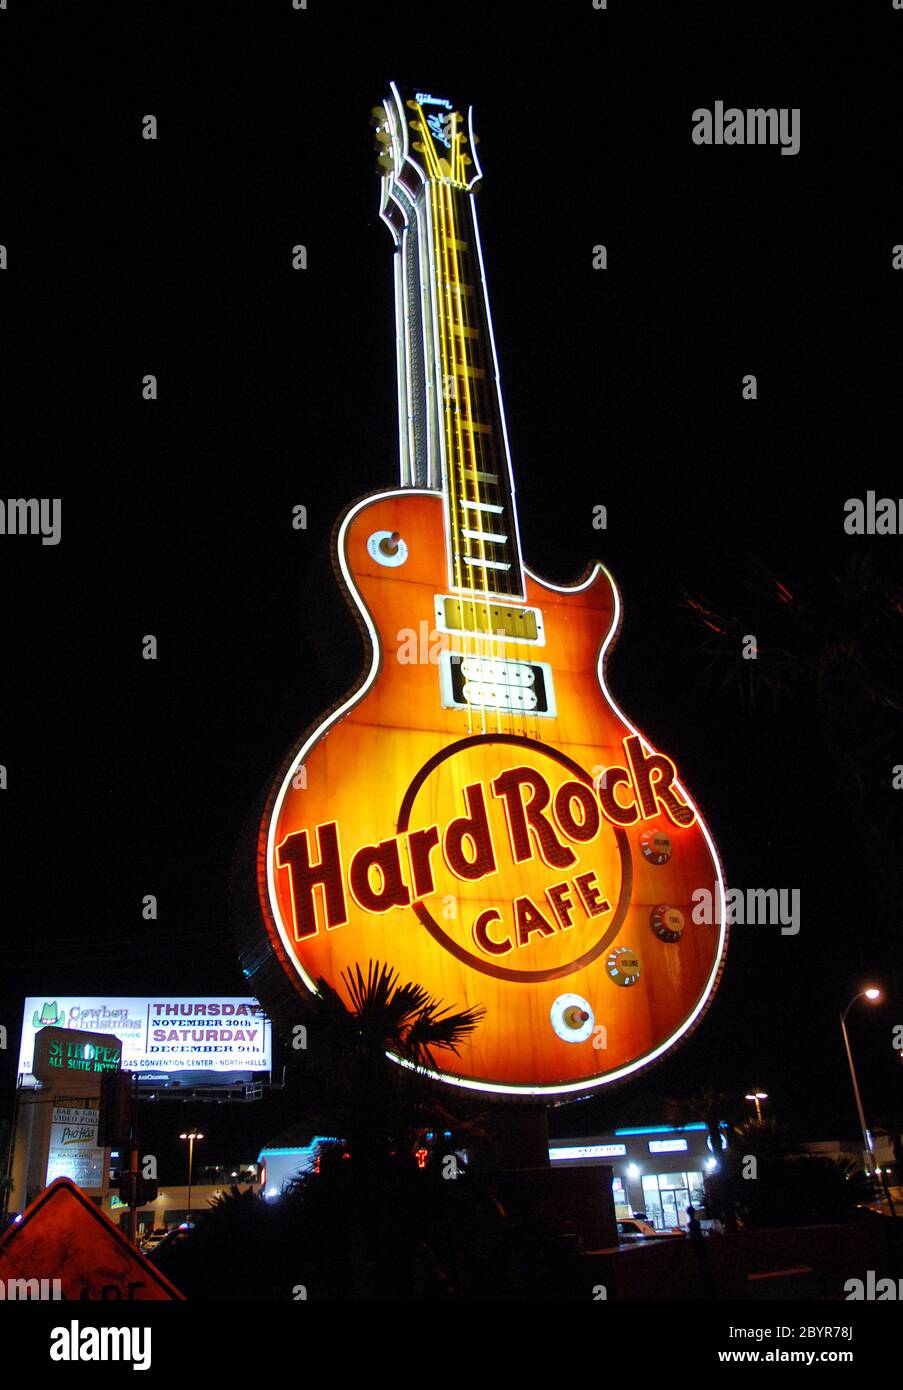 Hard Rock Cafe Hotel Las Vegas 249 Hotel and most important places in Las Vegas The most beautiful place in Las Vegas Stock Photo